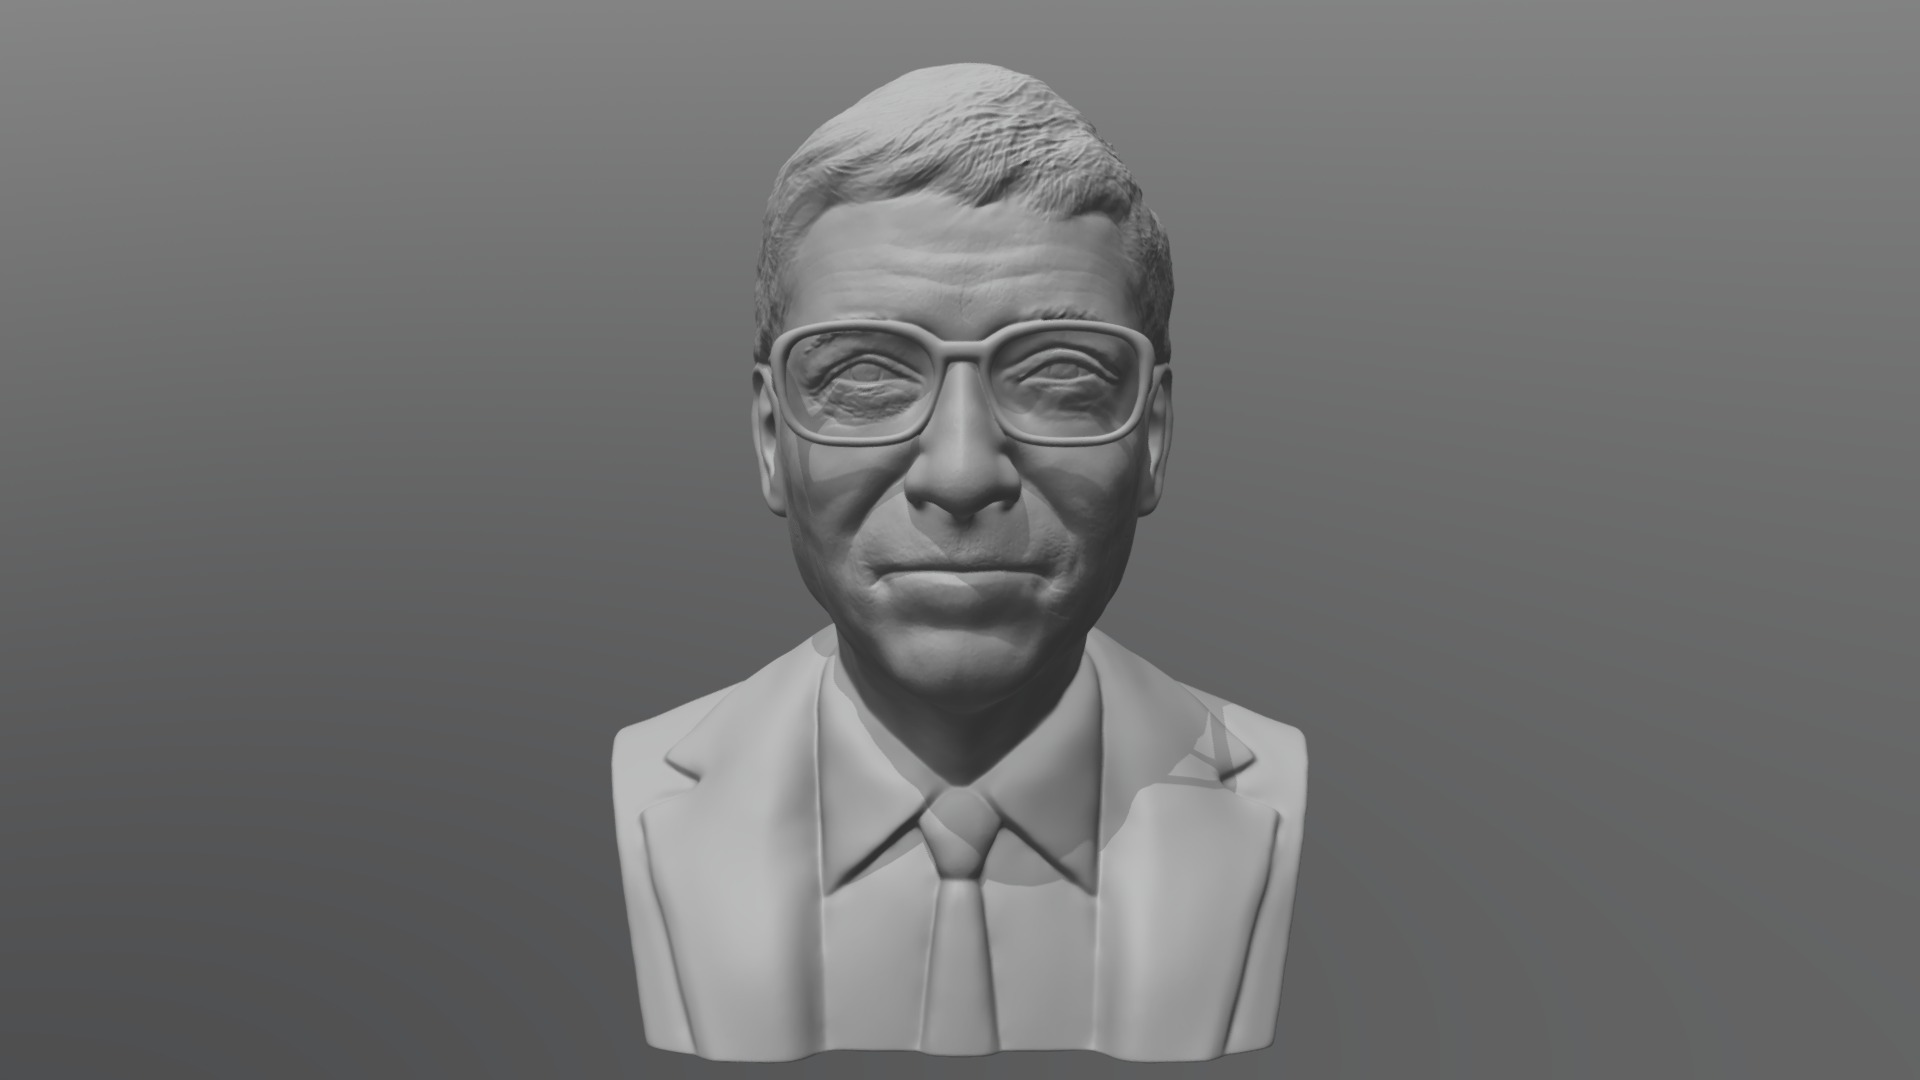 3D model Bill Gates bust for 3D printing - This is a 3D model of the Bill Gates bust for 3D printing. The 3D model is about a man wearing glasses.